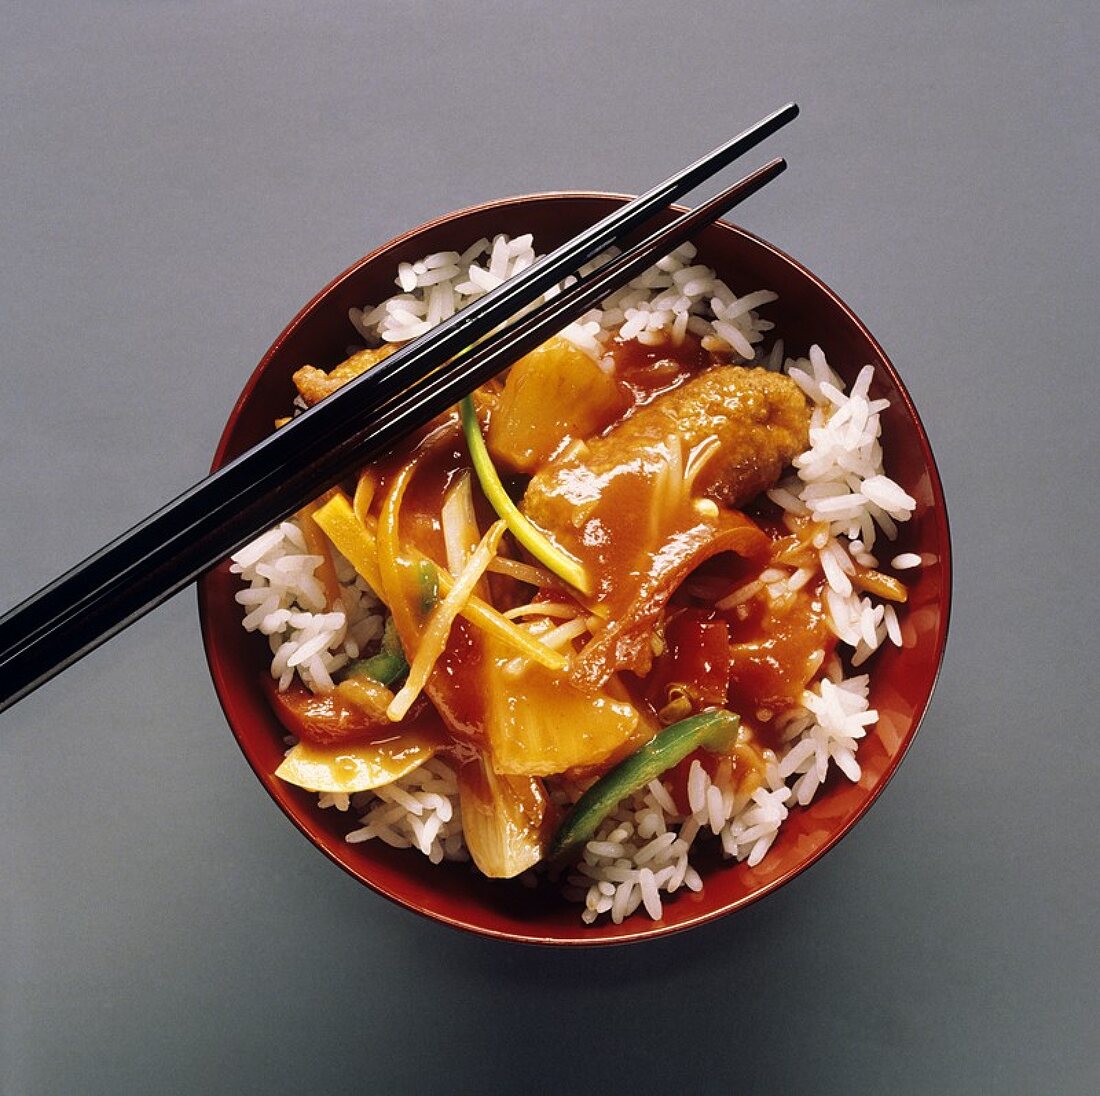 Sweet and sour pork with rice in bowl